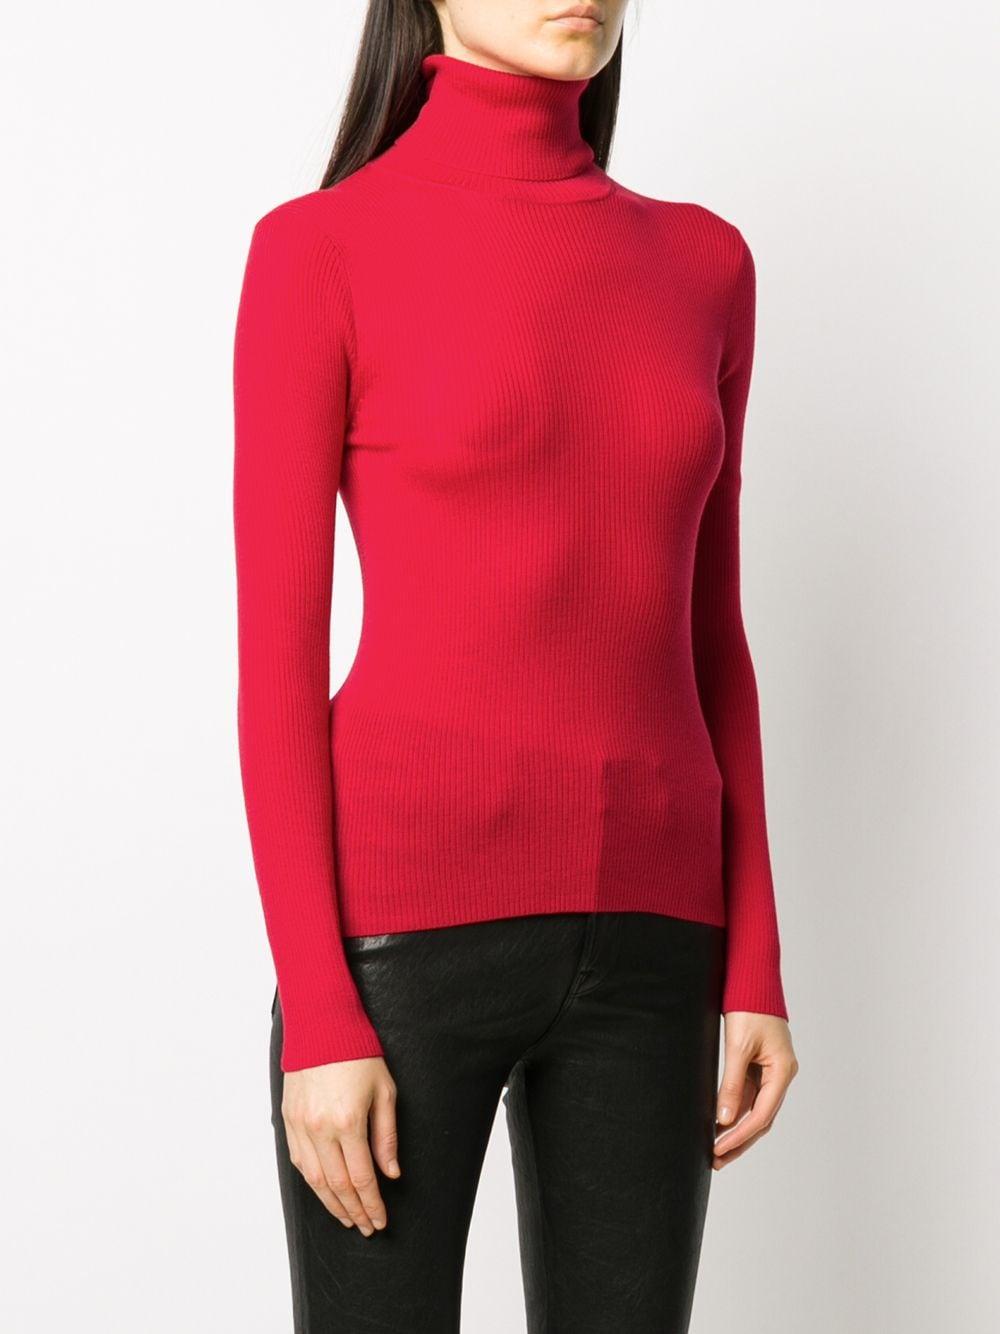 P.A.R.O.S.H. Wool Ribbed Roll-neck Jumper in Red - Lyst